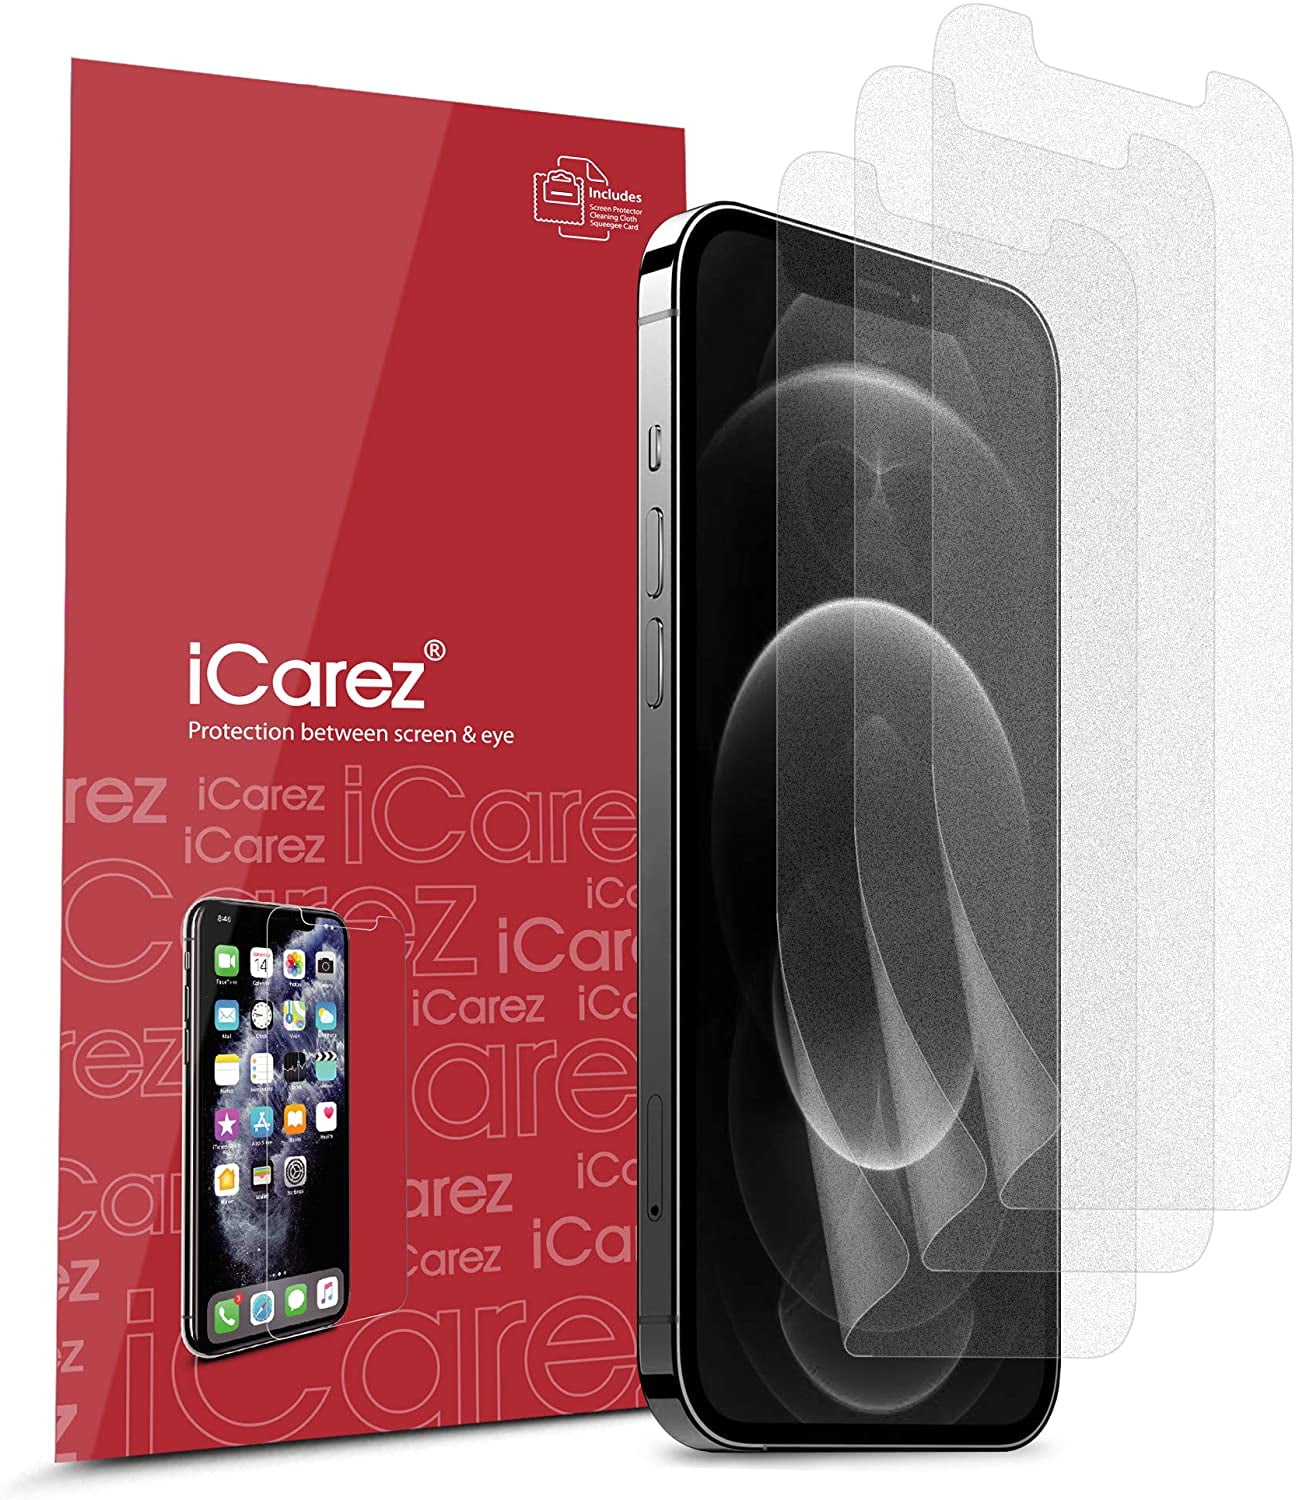 Icarez Hd Anti Glare Matte Screen Protector For Iphone 12 Pro Max 6 7 Inch 3 Pack Case Friendly Premium No Bubble Easy To Apply With Hinge Installation Walmart Com